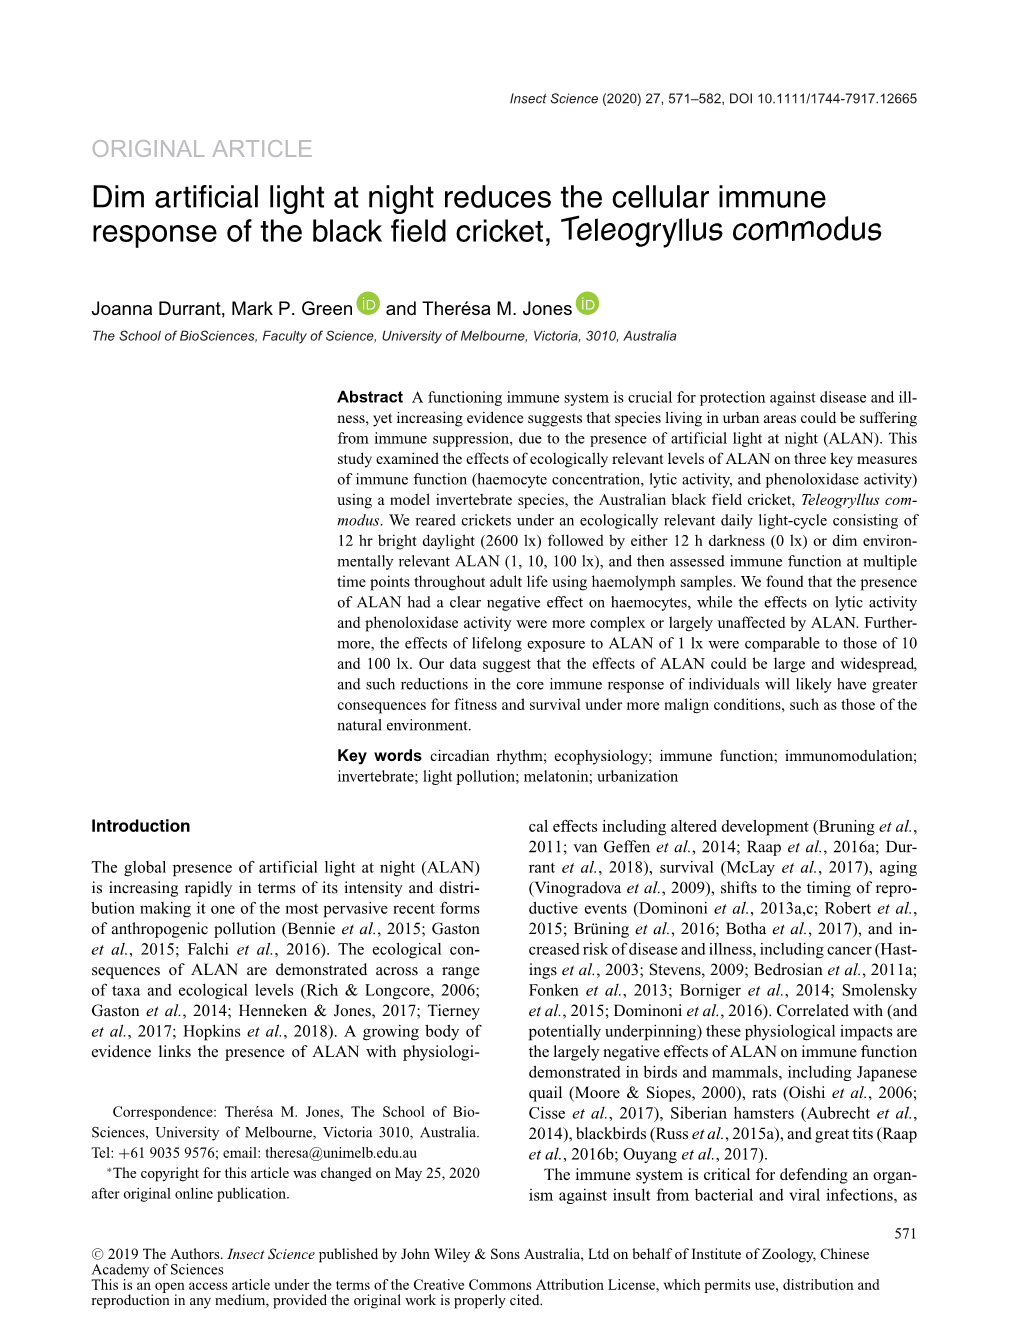 Dim Artificial Light at Night Reduces the Cellular Immune Response of The